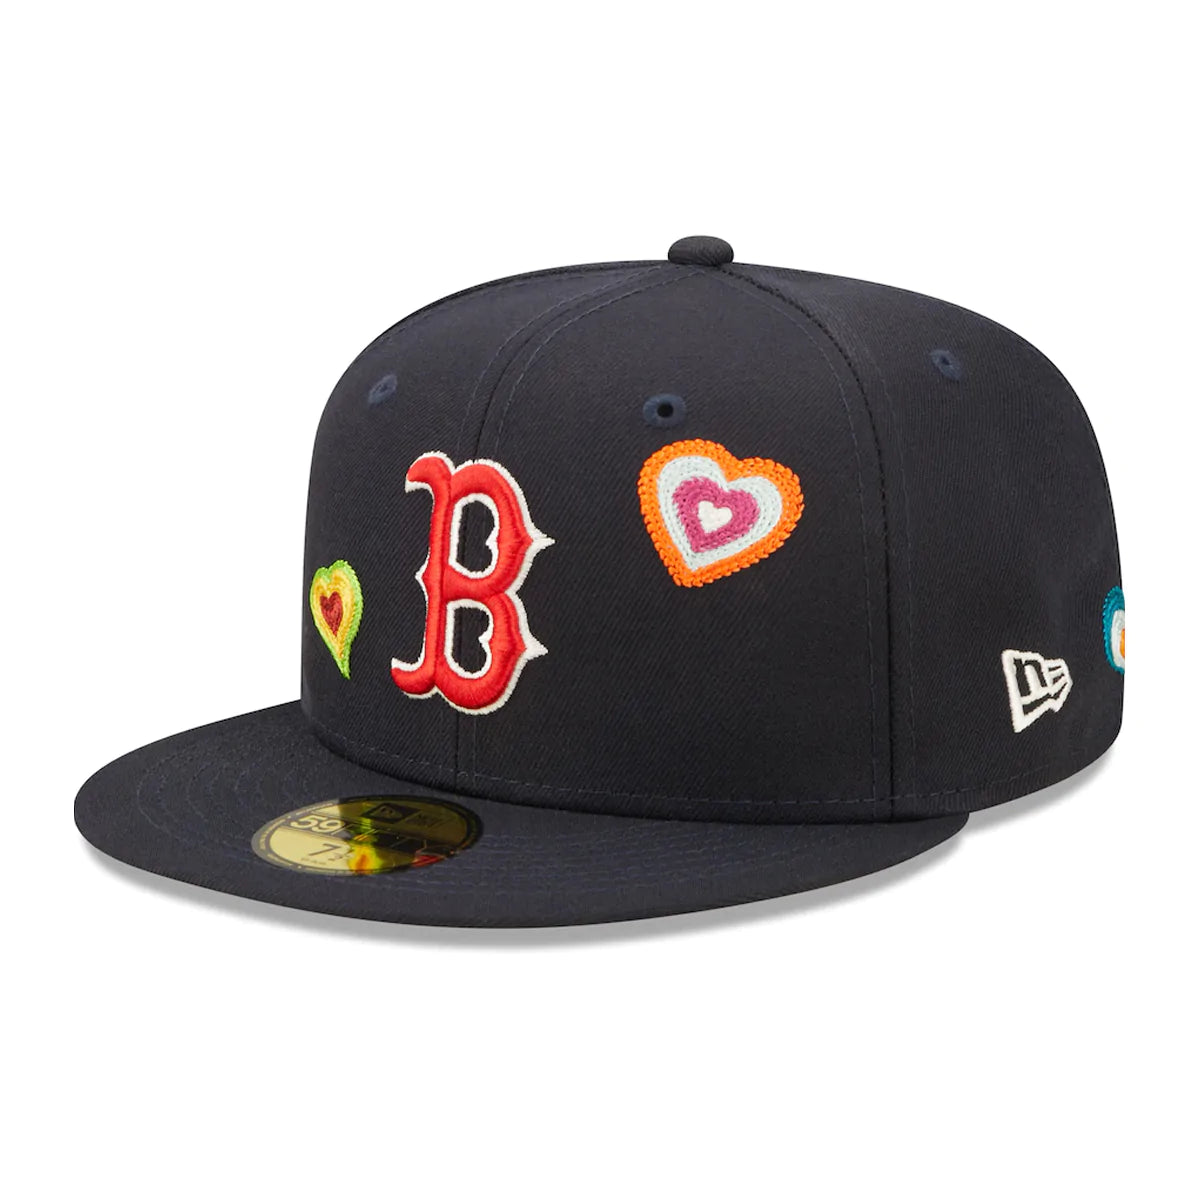 NEW ERA Boston Red Sox Chain Stitch Heart Navy 59FIFTY Fitted Cap